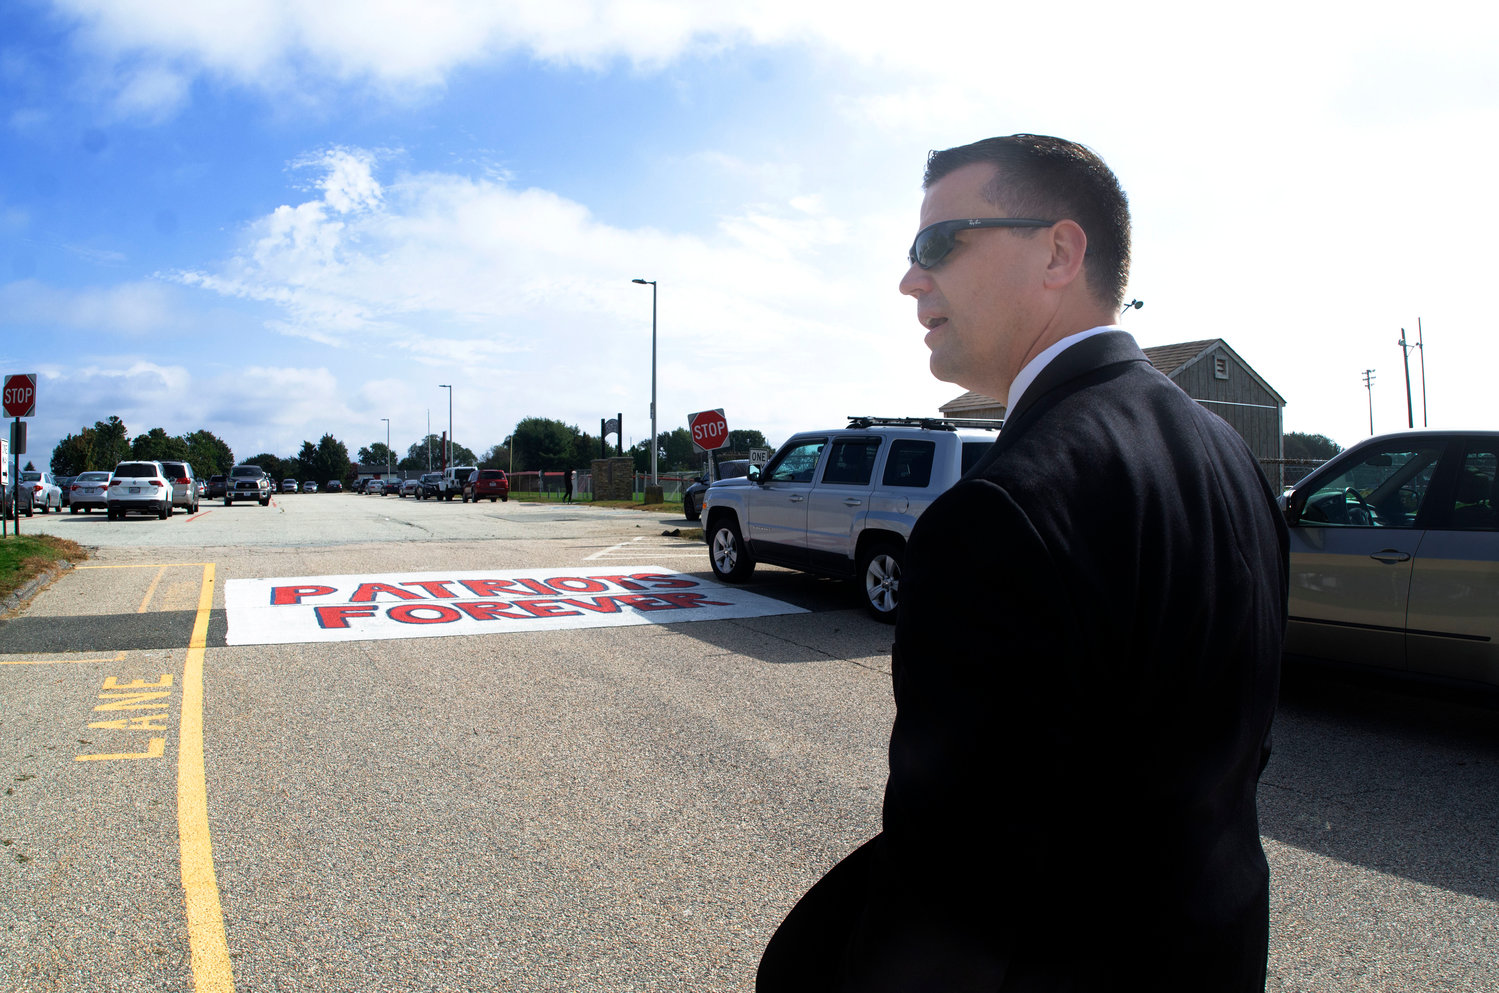 Superintendent Thomas Kenworthy stands on Memorial Drive, which is owned and maintained by the School Department.  “It’s definitely a safety concern,” he said. “The plan would be to widen it, put full sidewalks in on both sides, and refinish it.”